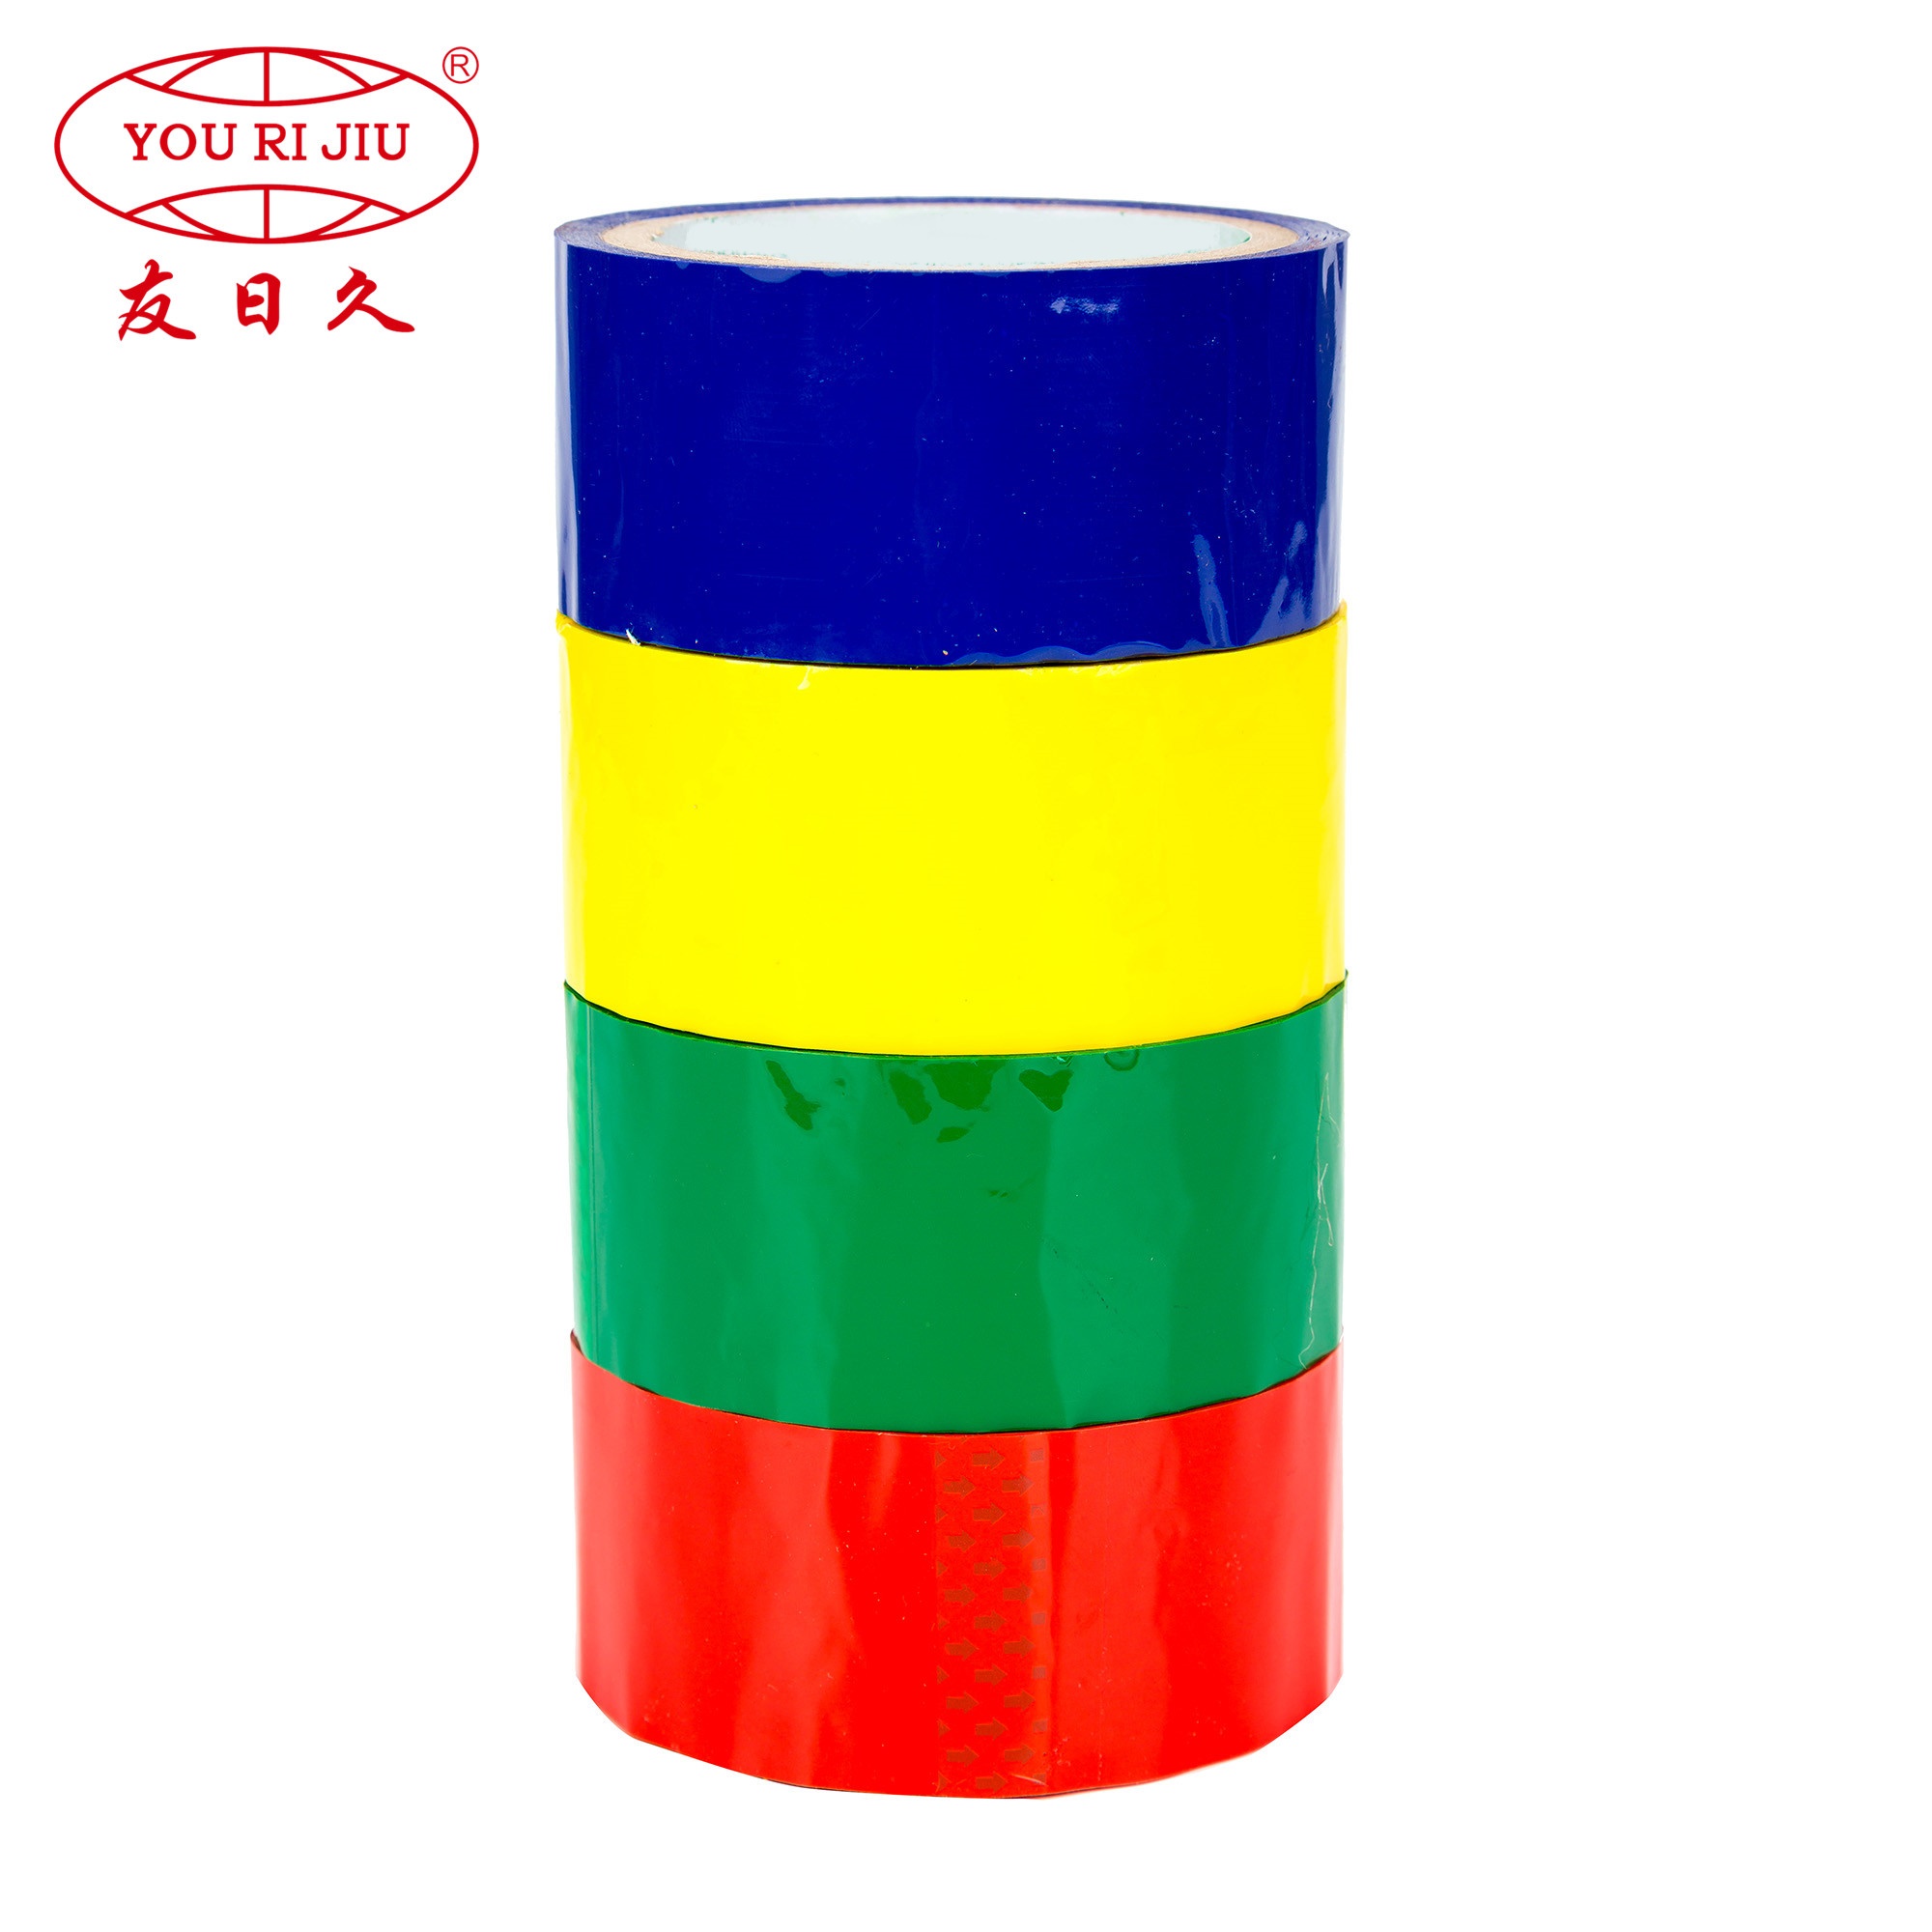 Yourijiu odorless bopp tape supplier for gift wrapping-1